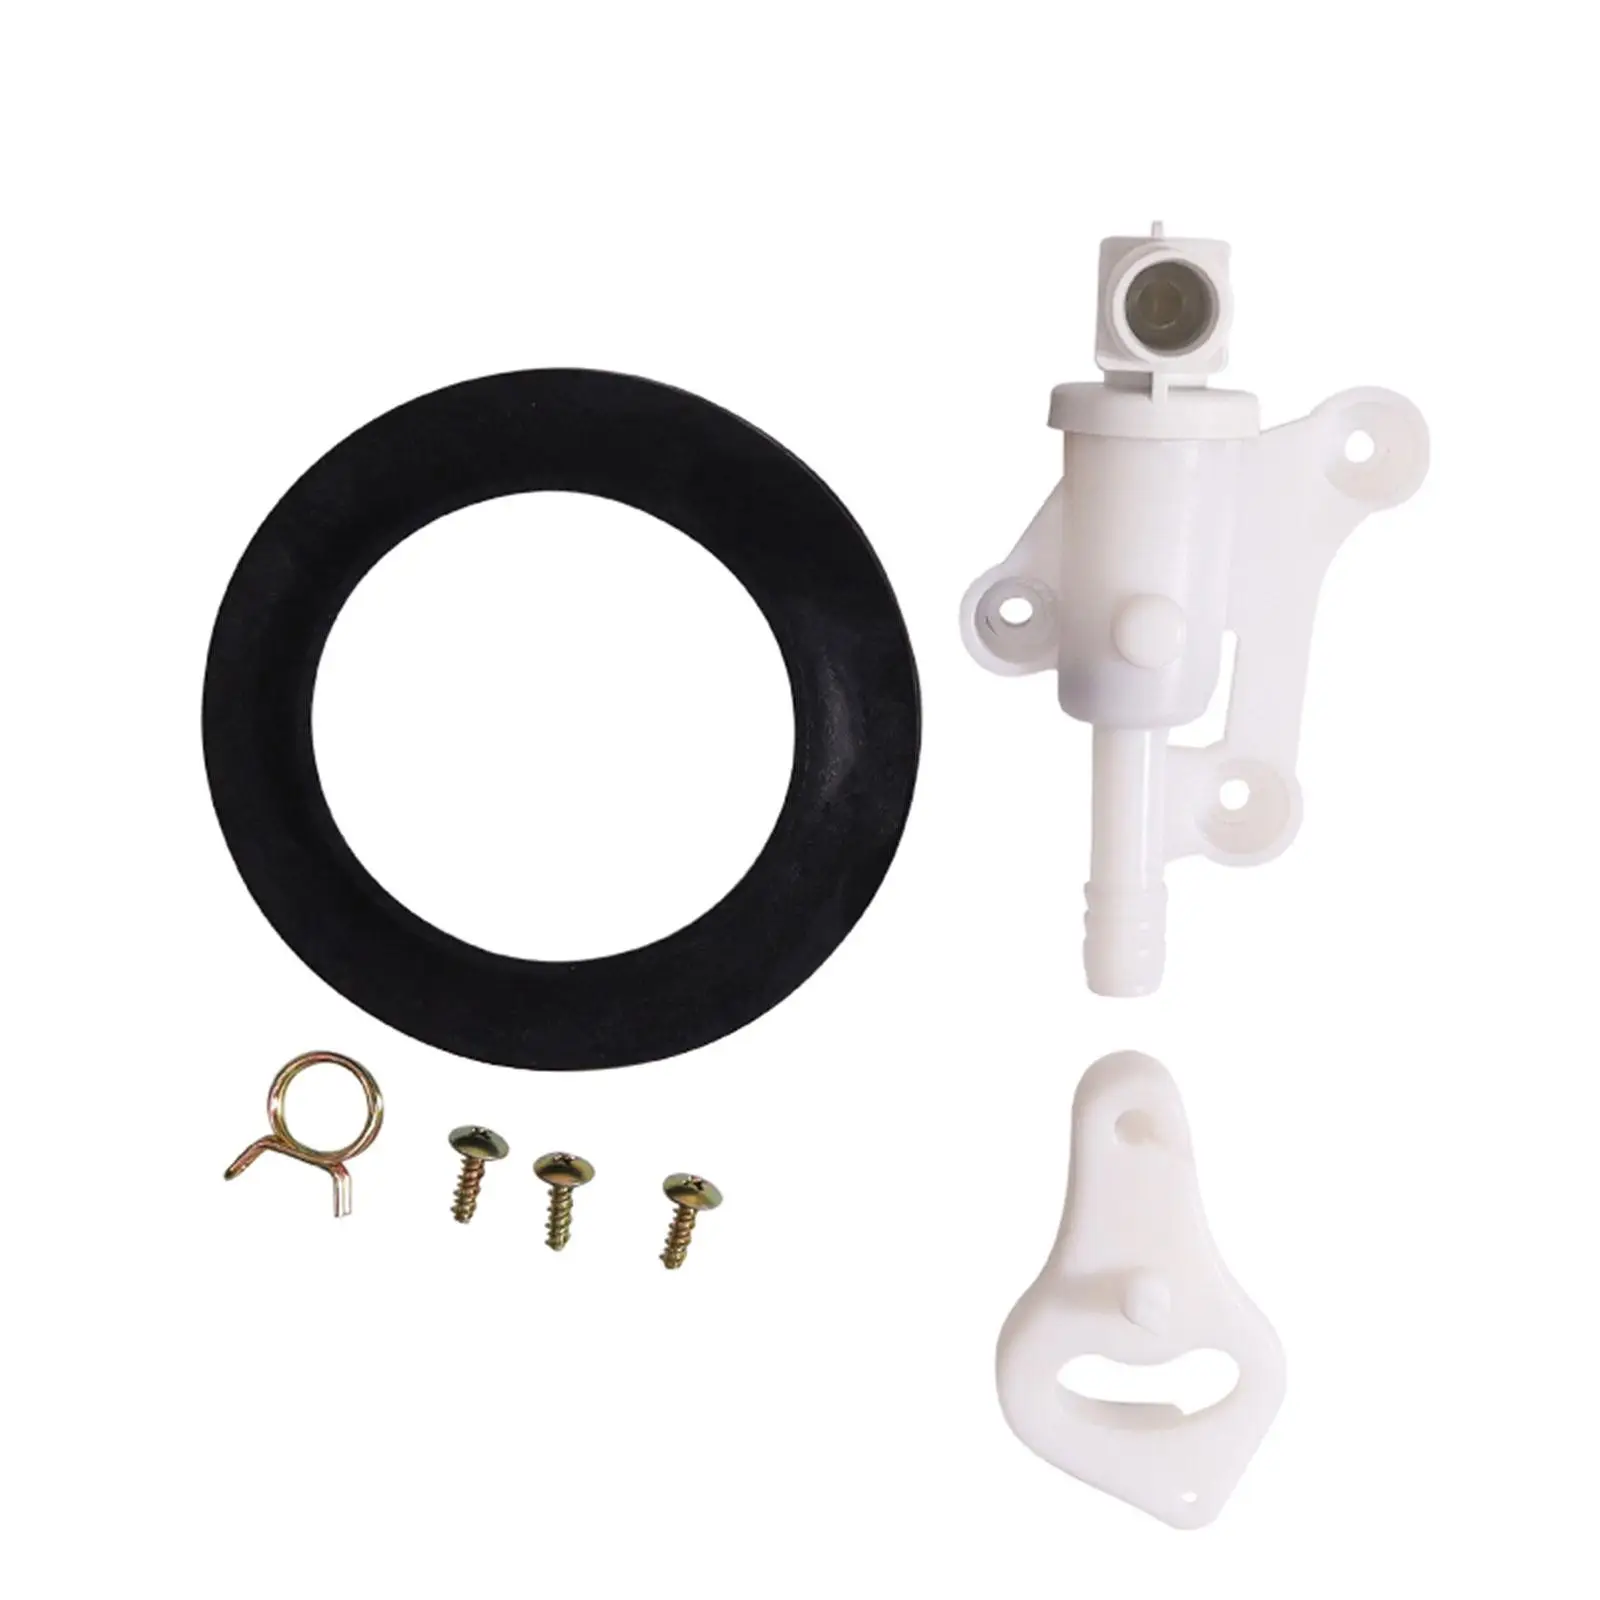 34100 RV Water Valve Convenient Replacements for Style Lite Toilets